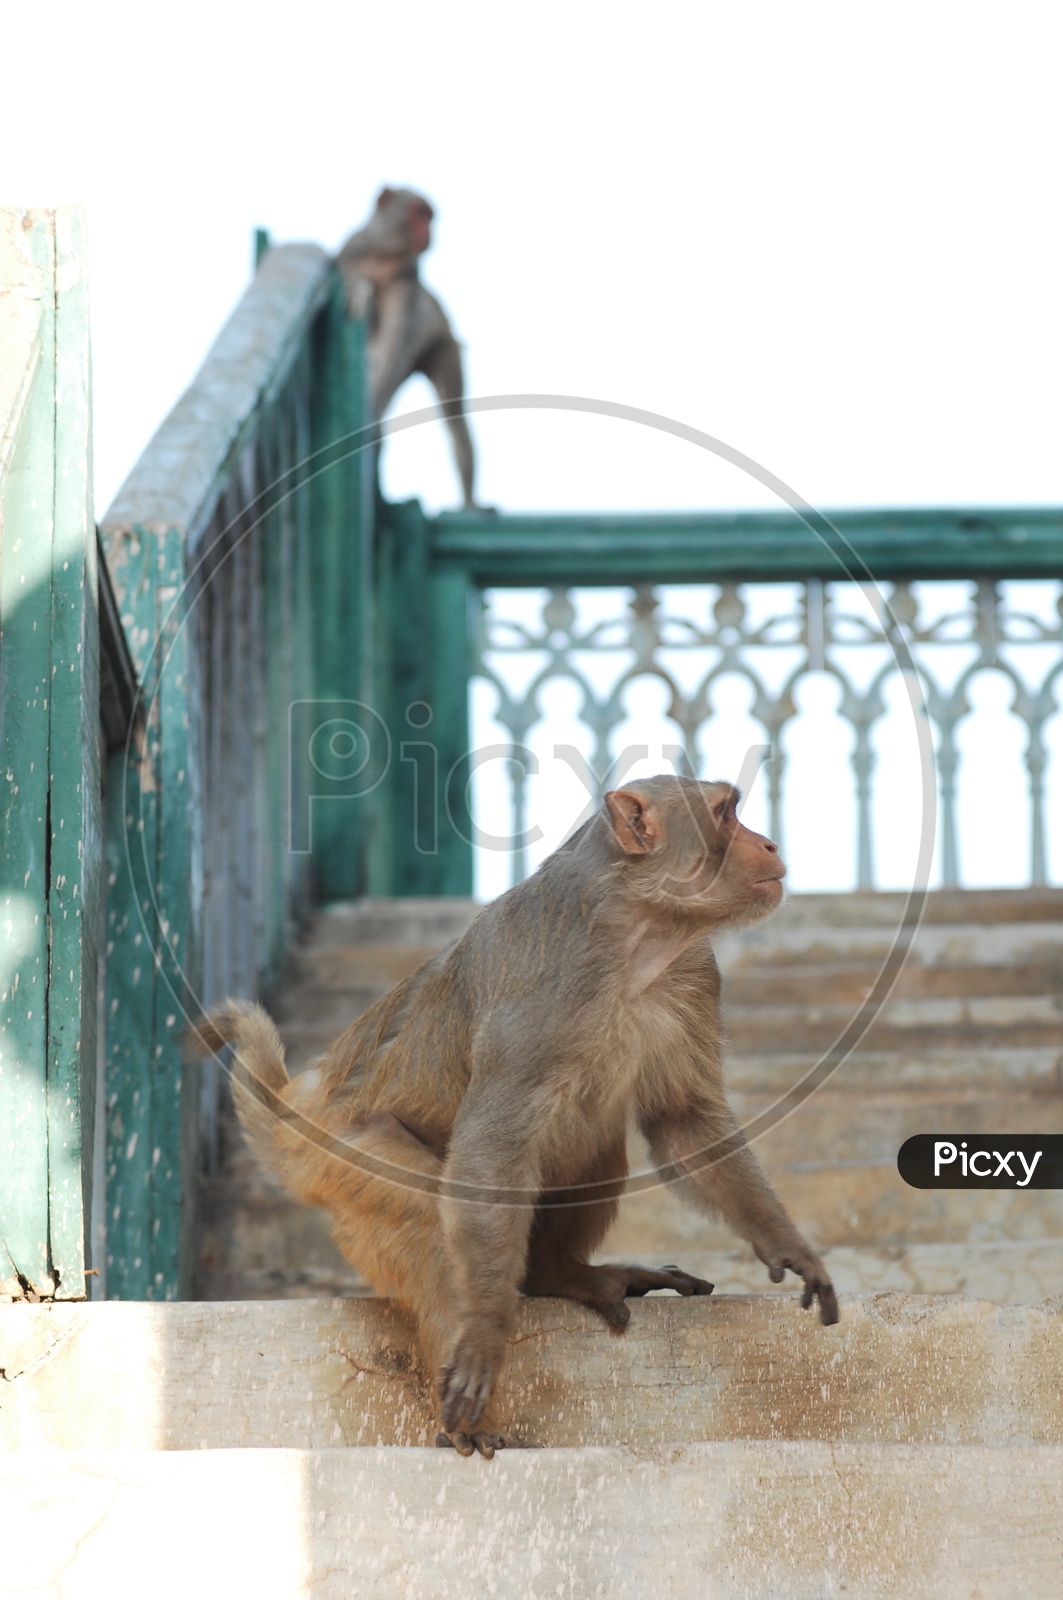 A Macaque looking side wards